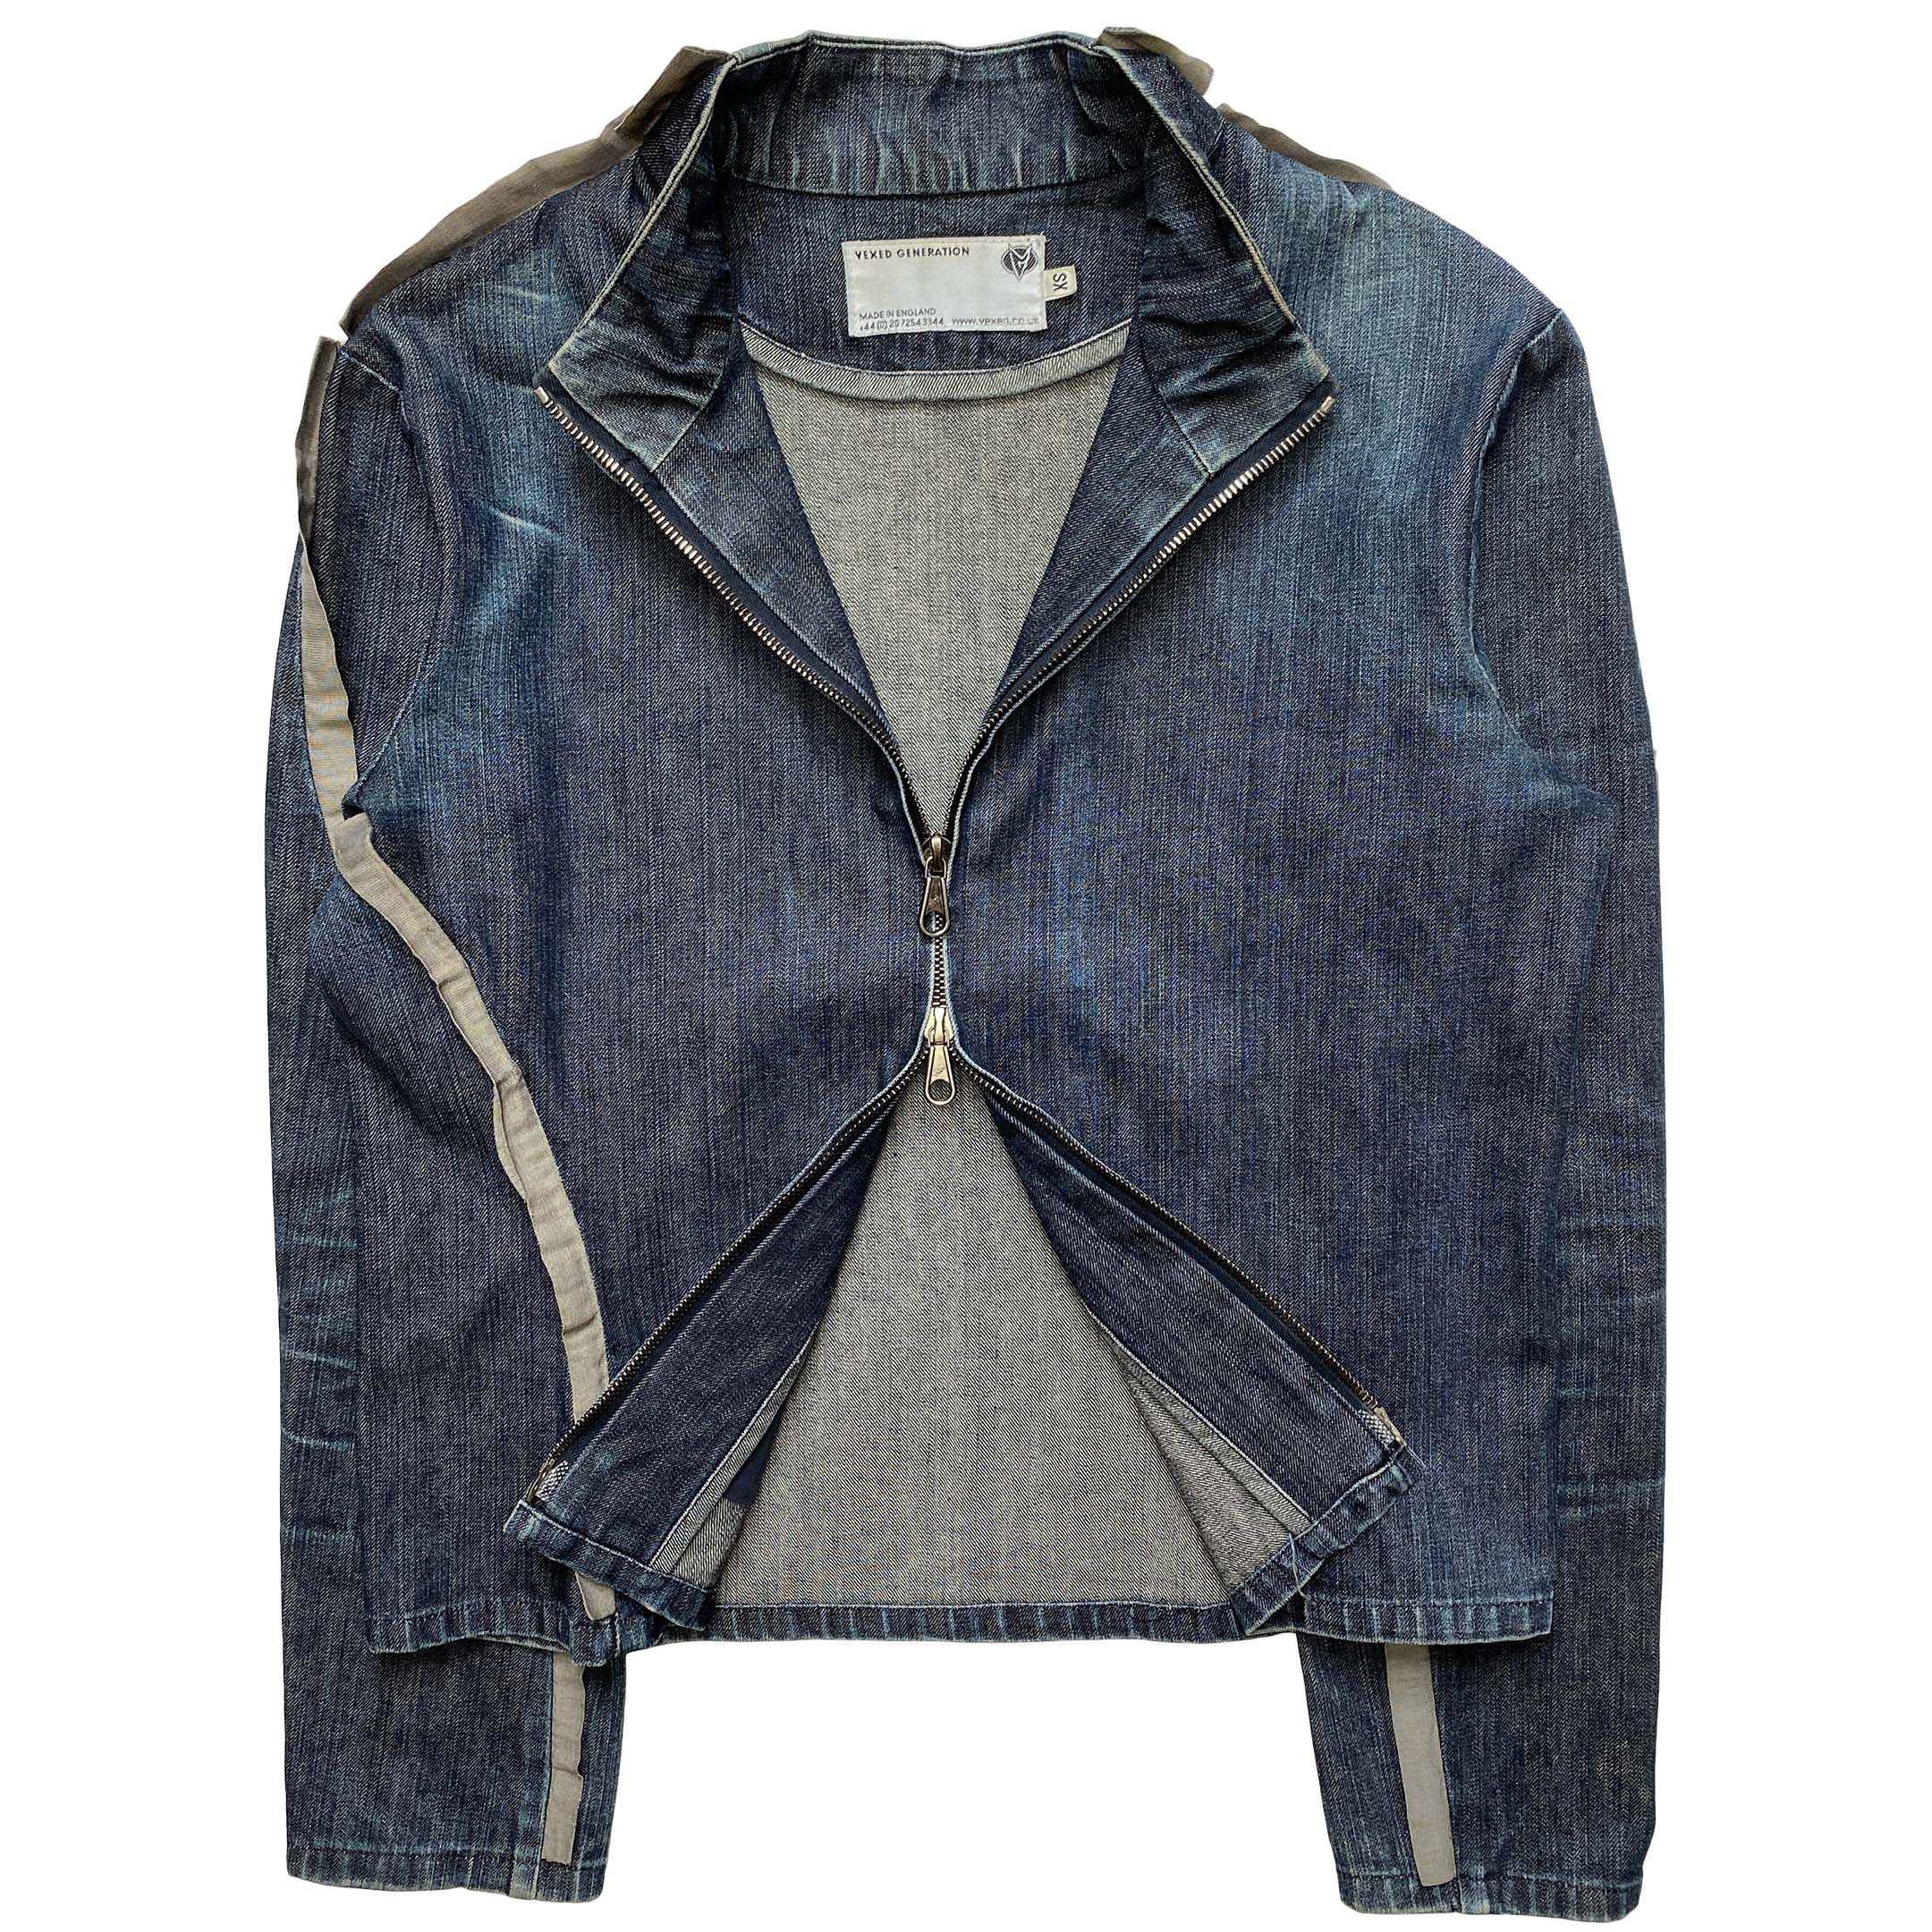 Vexed Generation, 1990s 'Recovery Position' Denim Zipped Jacket